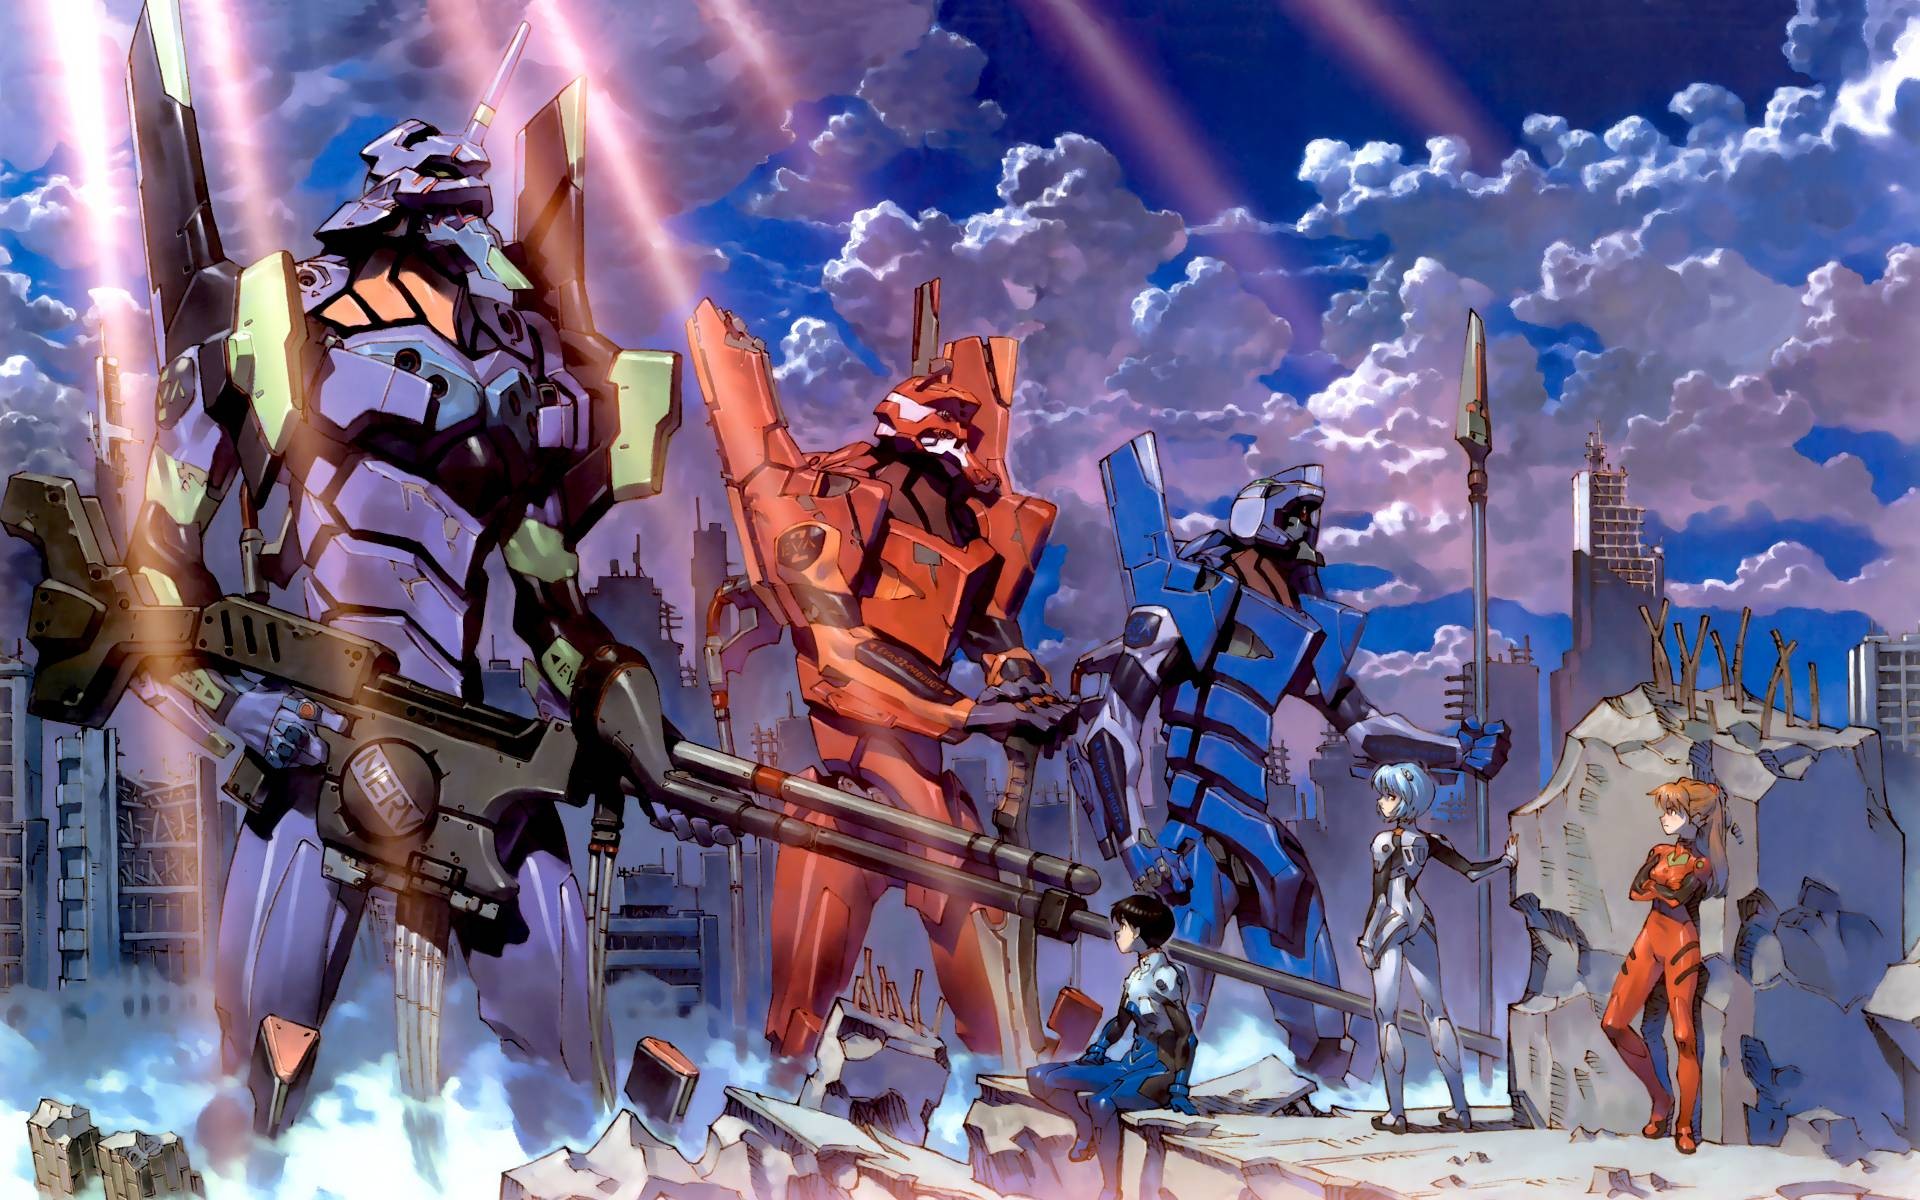 What would you Rate the Neon Genesis Evangelion Franchise?